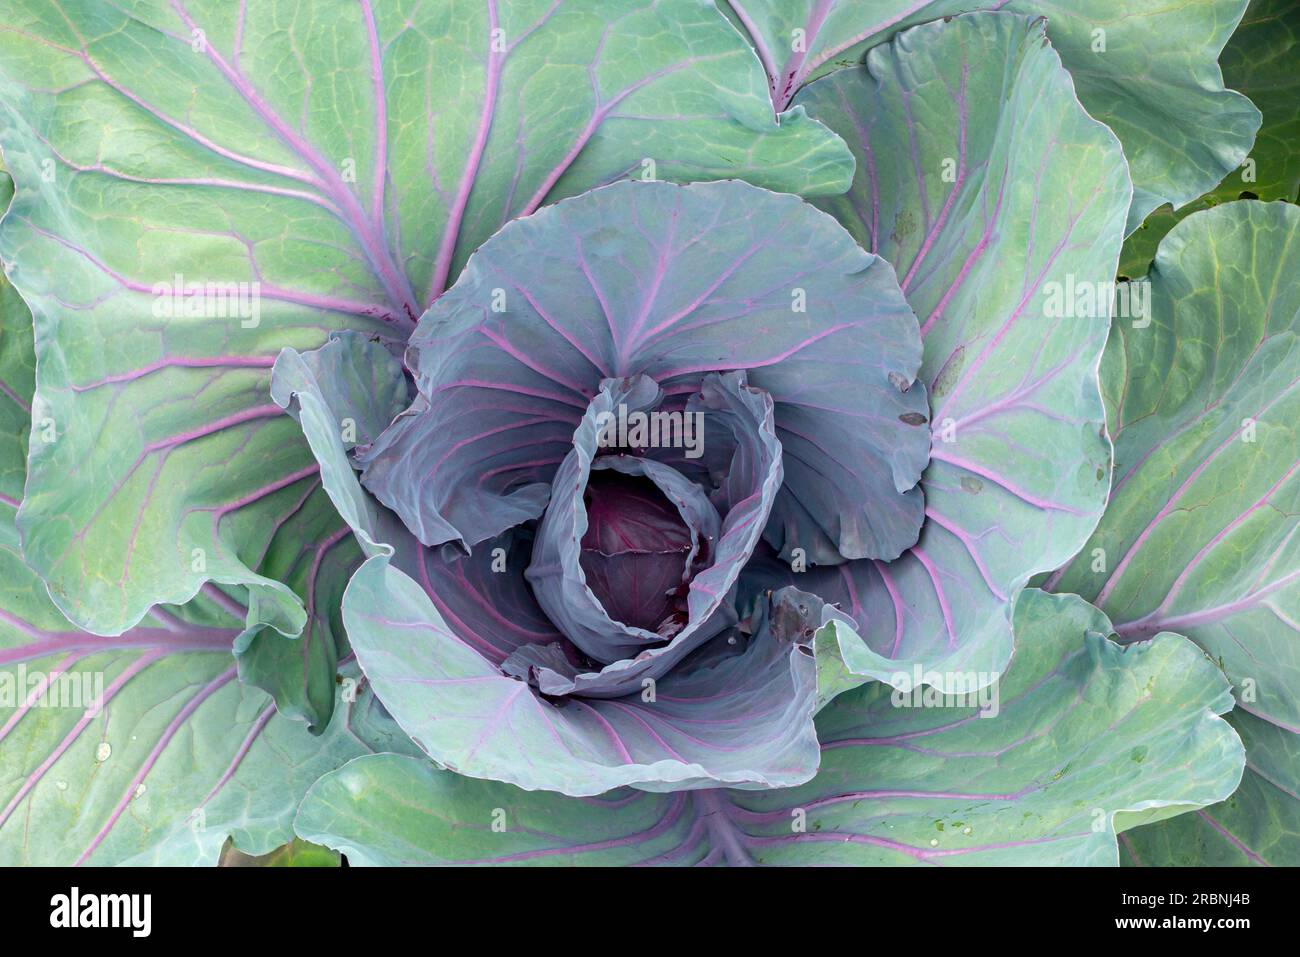 Cabbage plant a popular cultivar of the species Brassica oleracea Linne Capitata Group of the Family Brassicaceae or Cruciferae Stock Photo